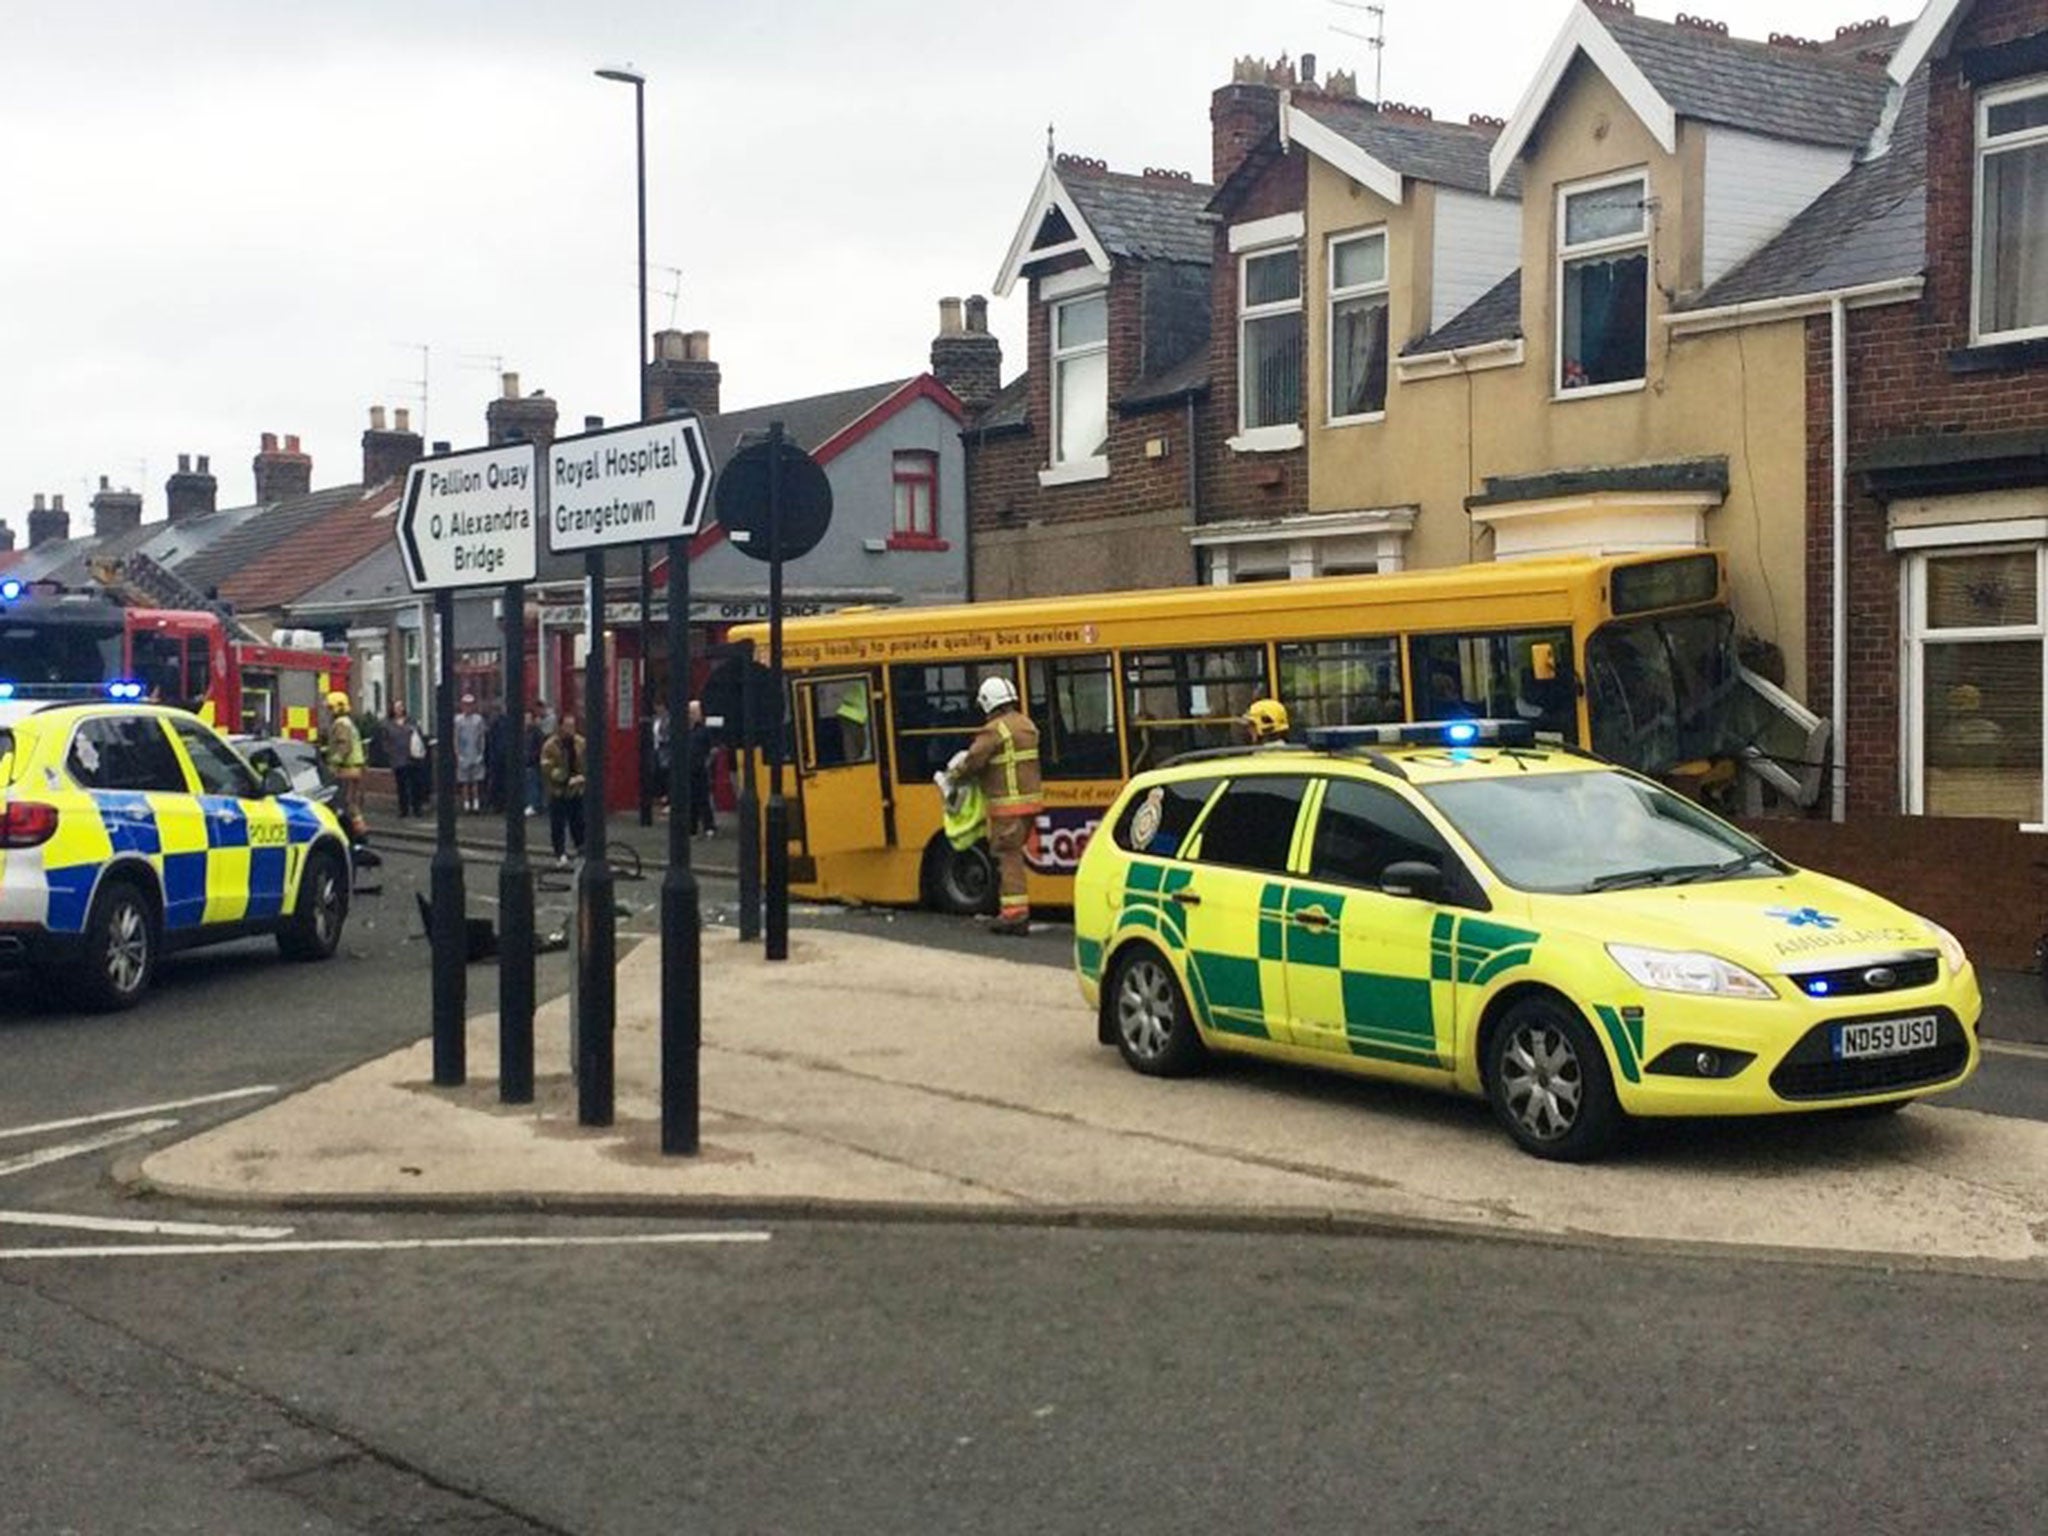 Handout photo courtesy of Kev Atkinson of the scene of a bus crash in Merle Terrace, Pallion, Sunderland, after a yellow single-decker hit a house near a junction. PRESS ASSOCIATION Photo. Picture date: Tuesday May 12, 2015. People escaped with minor inju